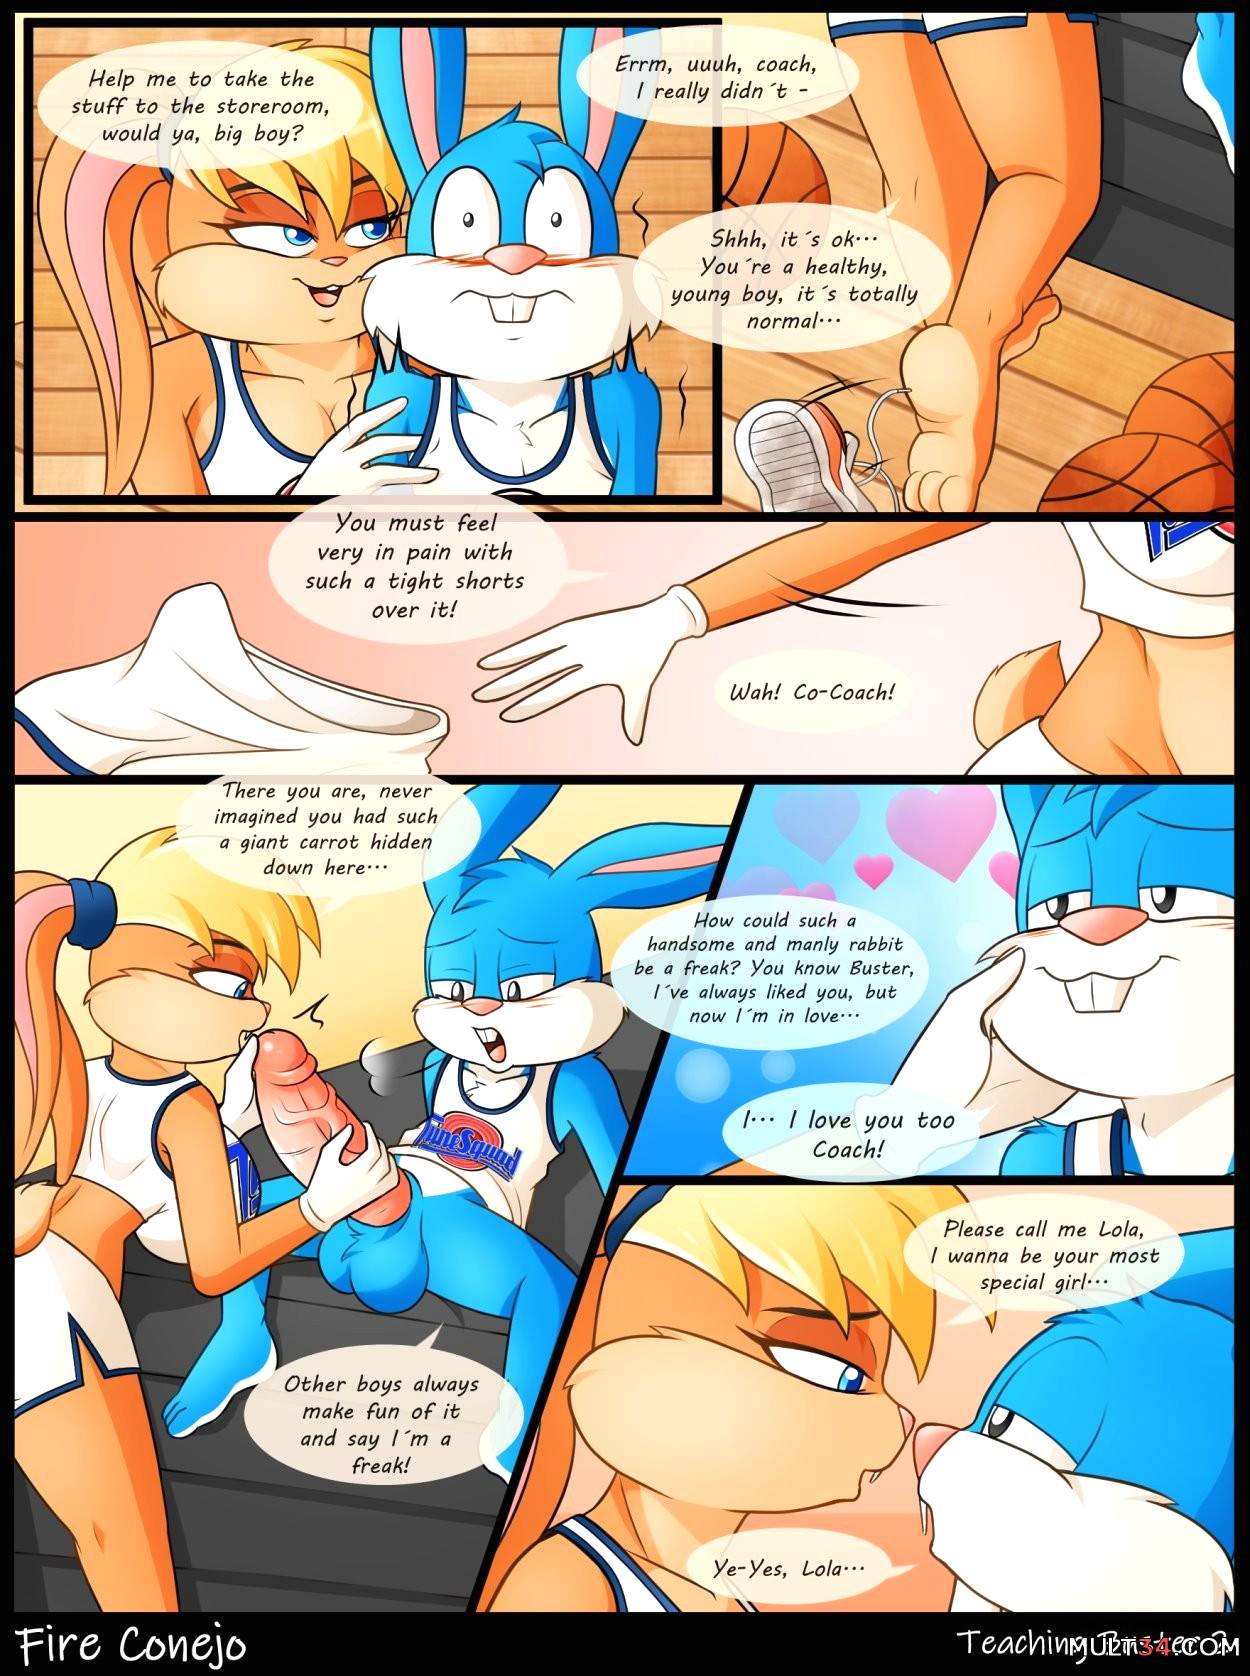 Teaching Buster page 3